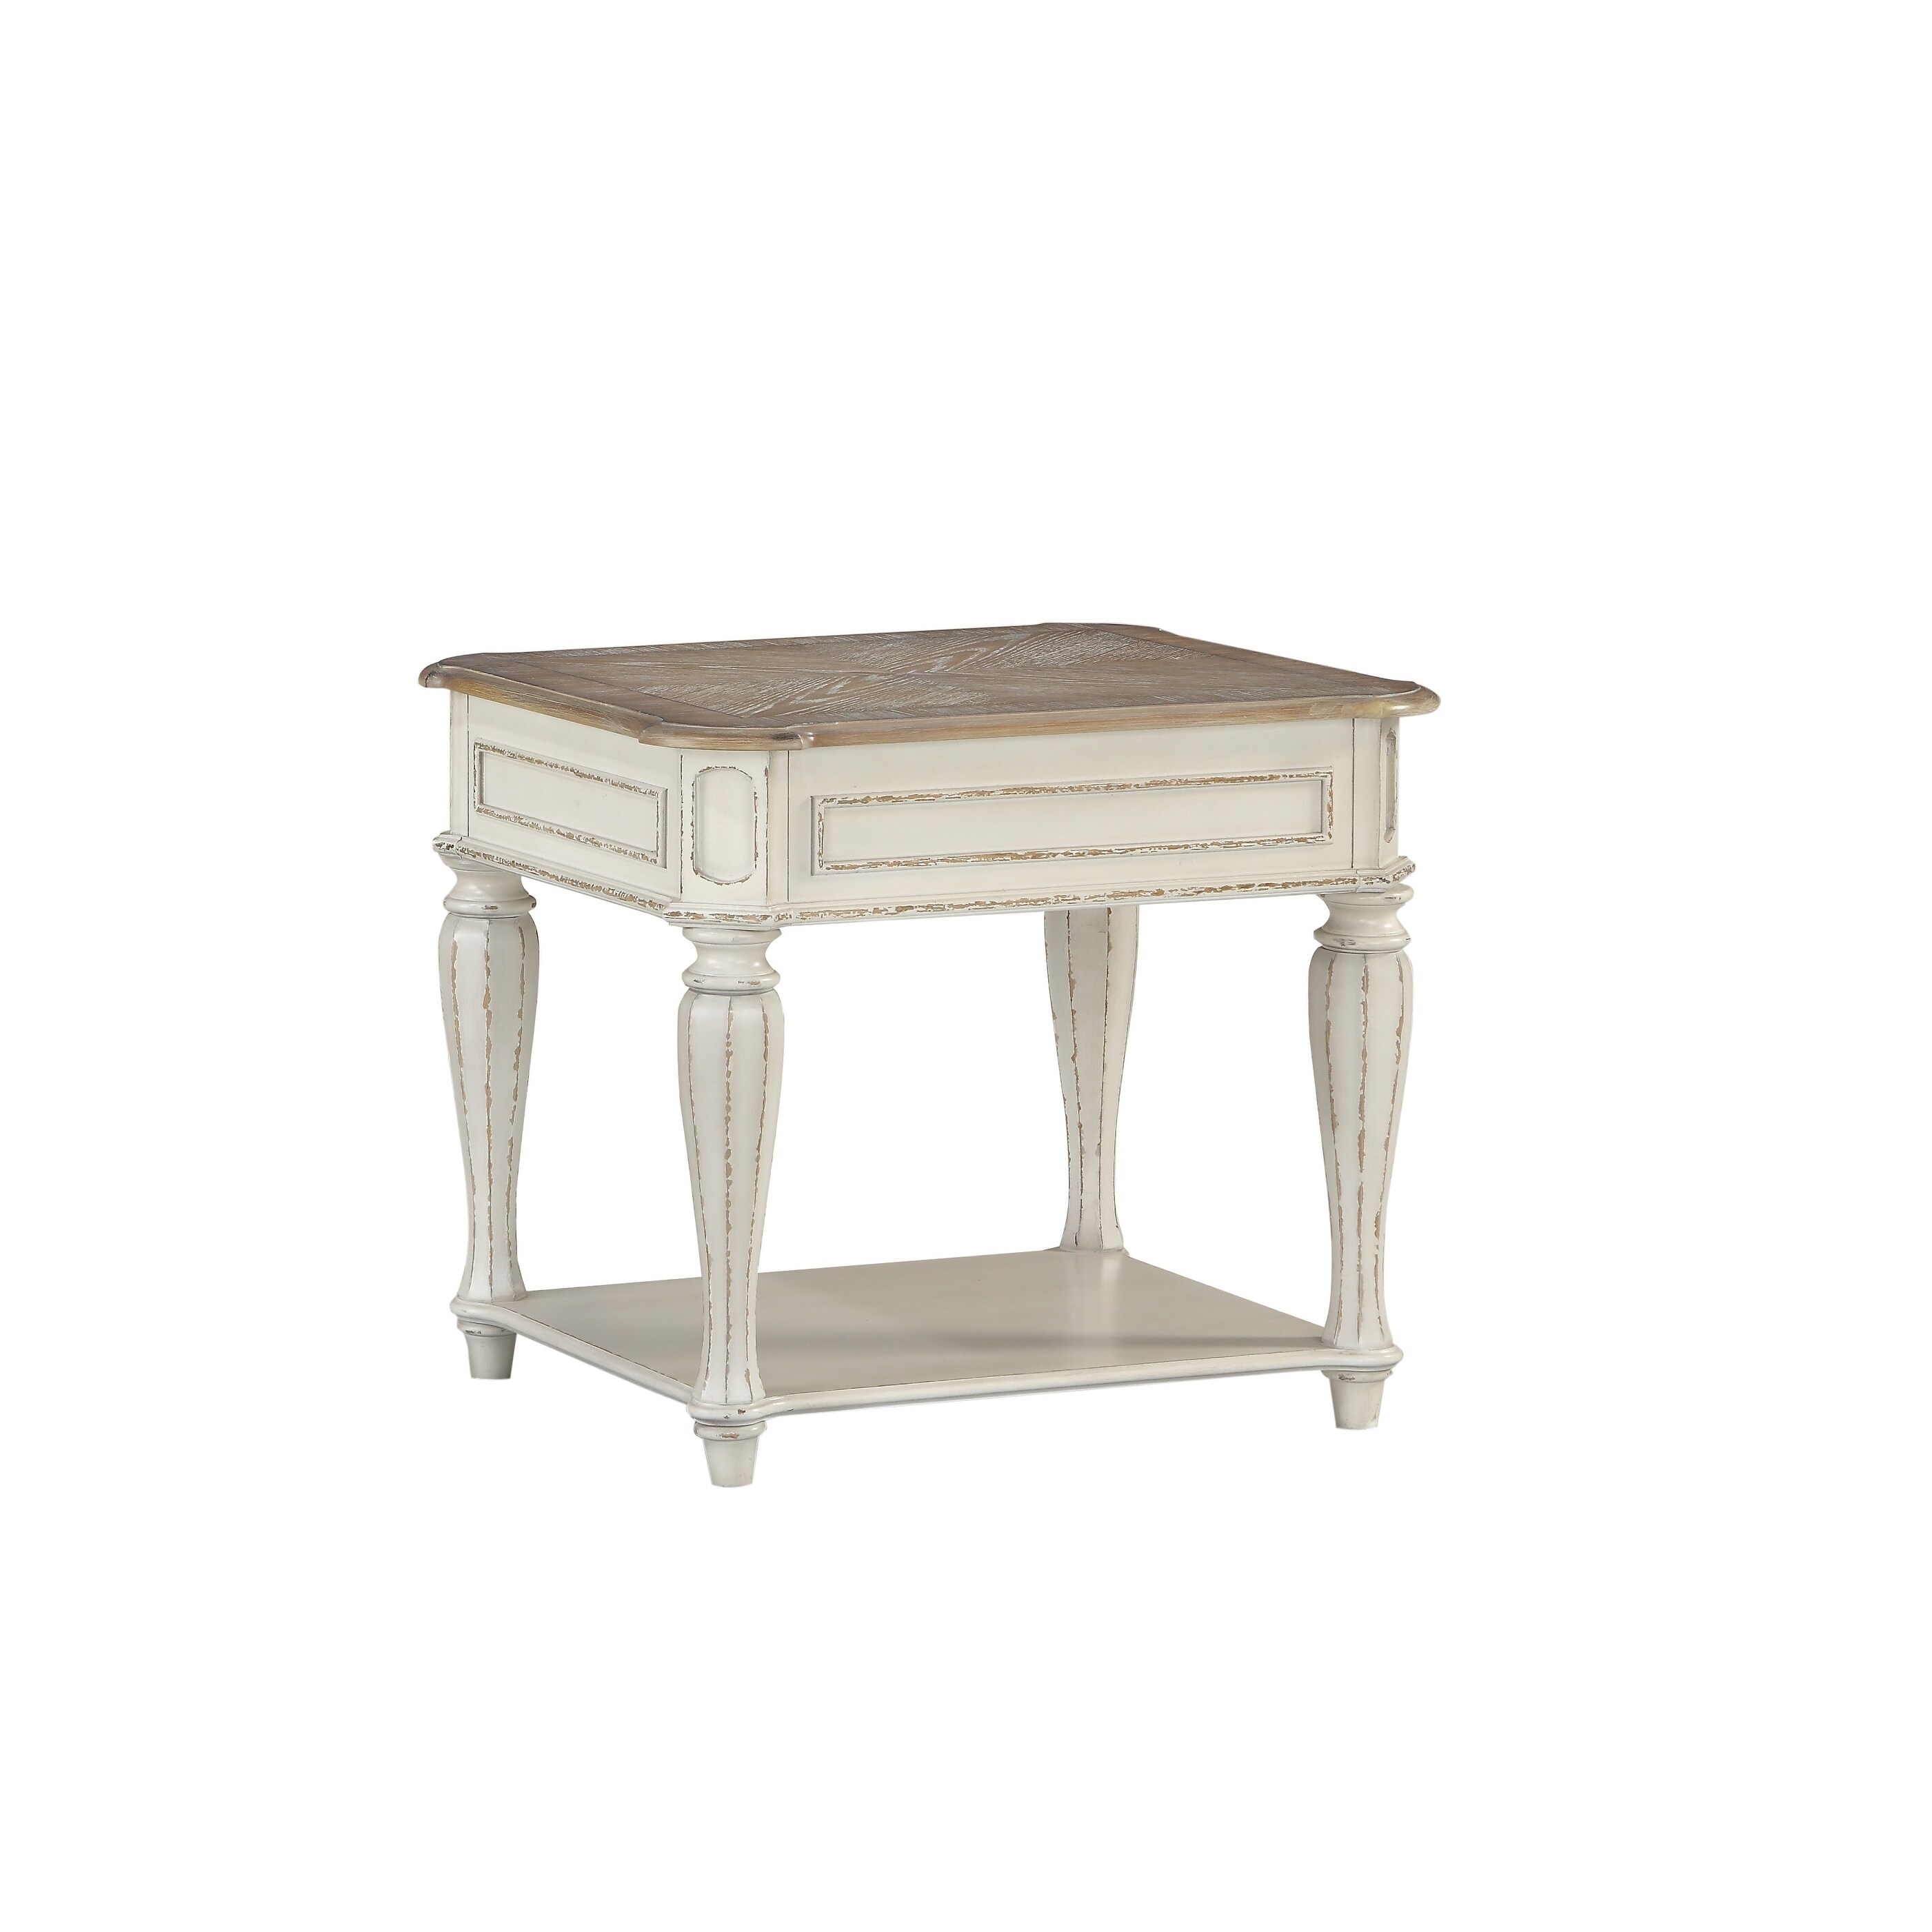 standard furniture stevenson manor white wood end table distressed tables free shipping today glass tops for farmhouse style dining back couch art off square coffee storage